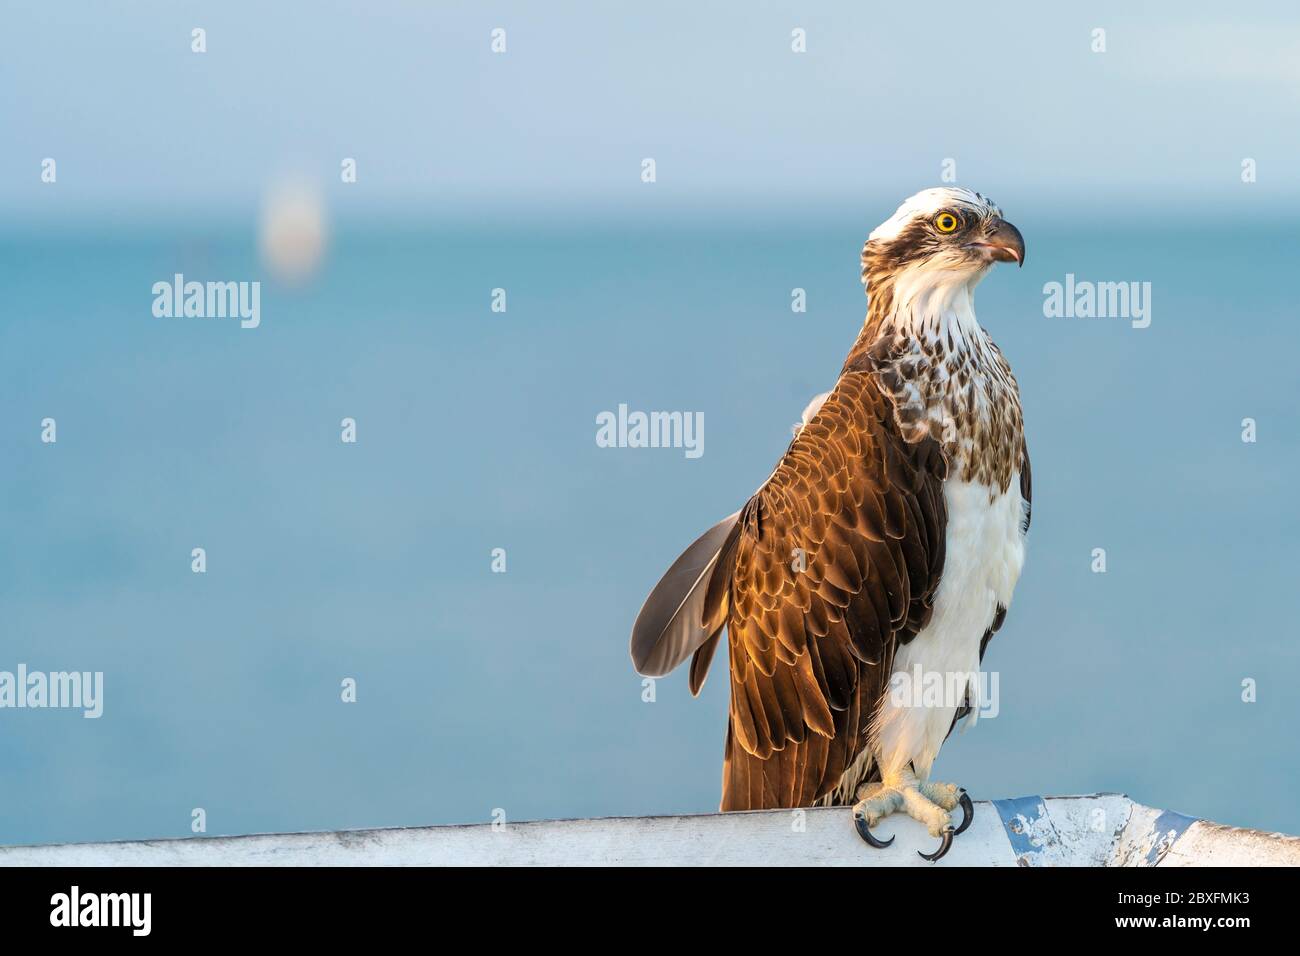 Osprey (pandion haliaetus) sitting on handrail with ocean in background Stock Photo